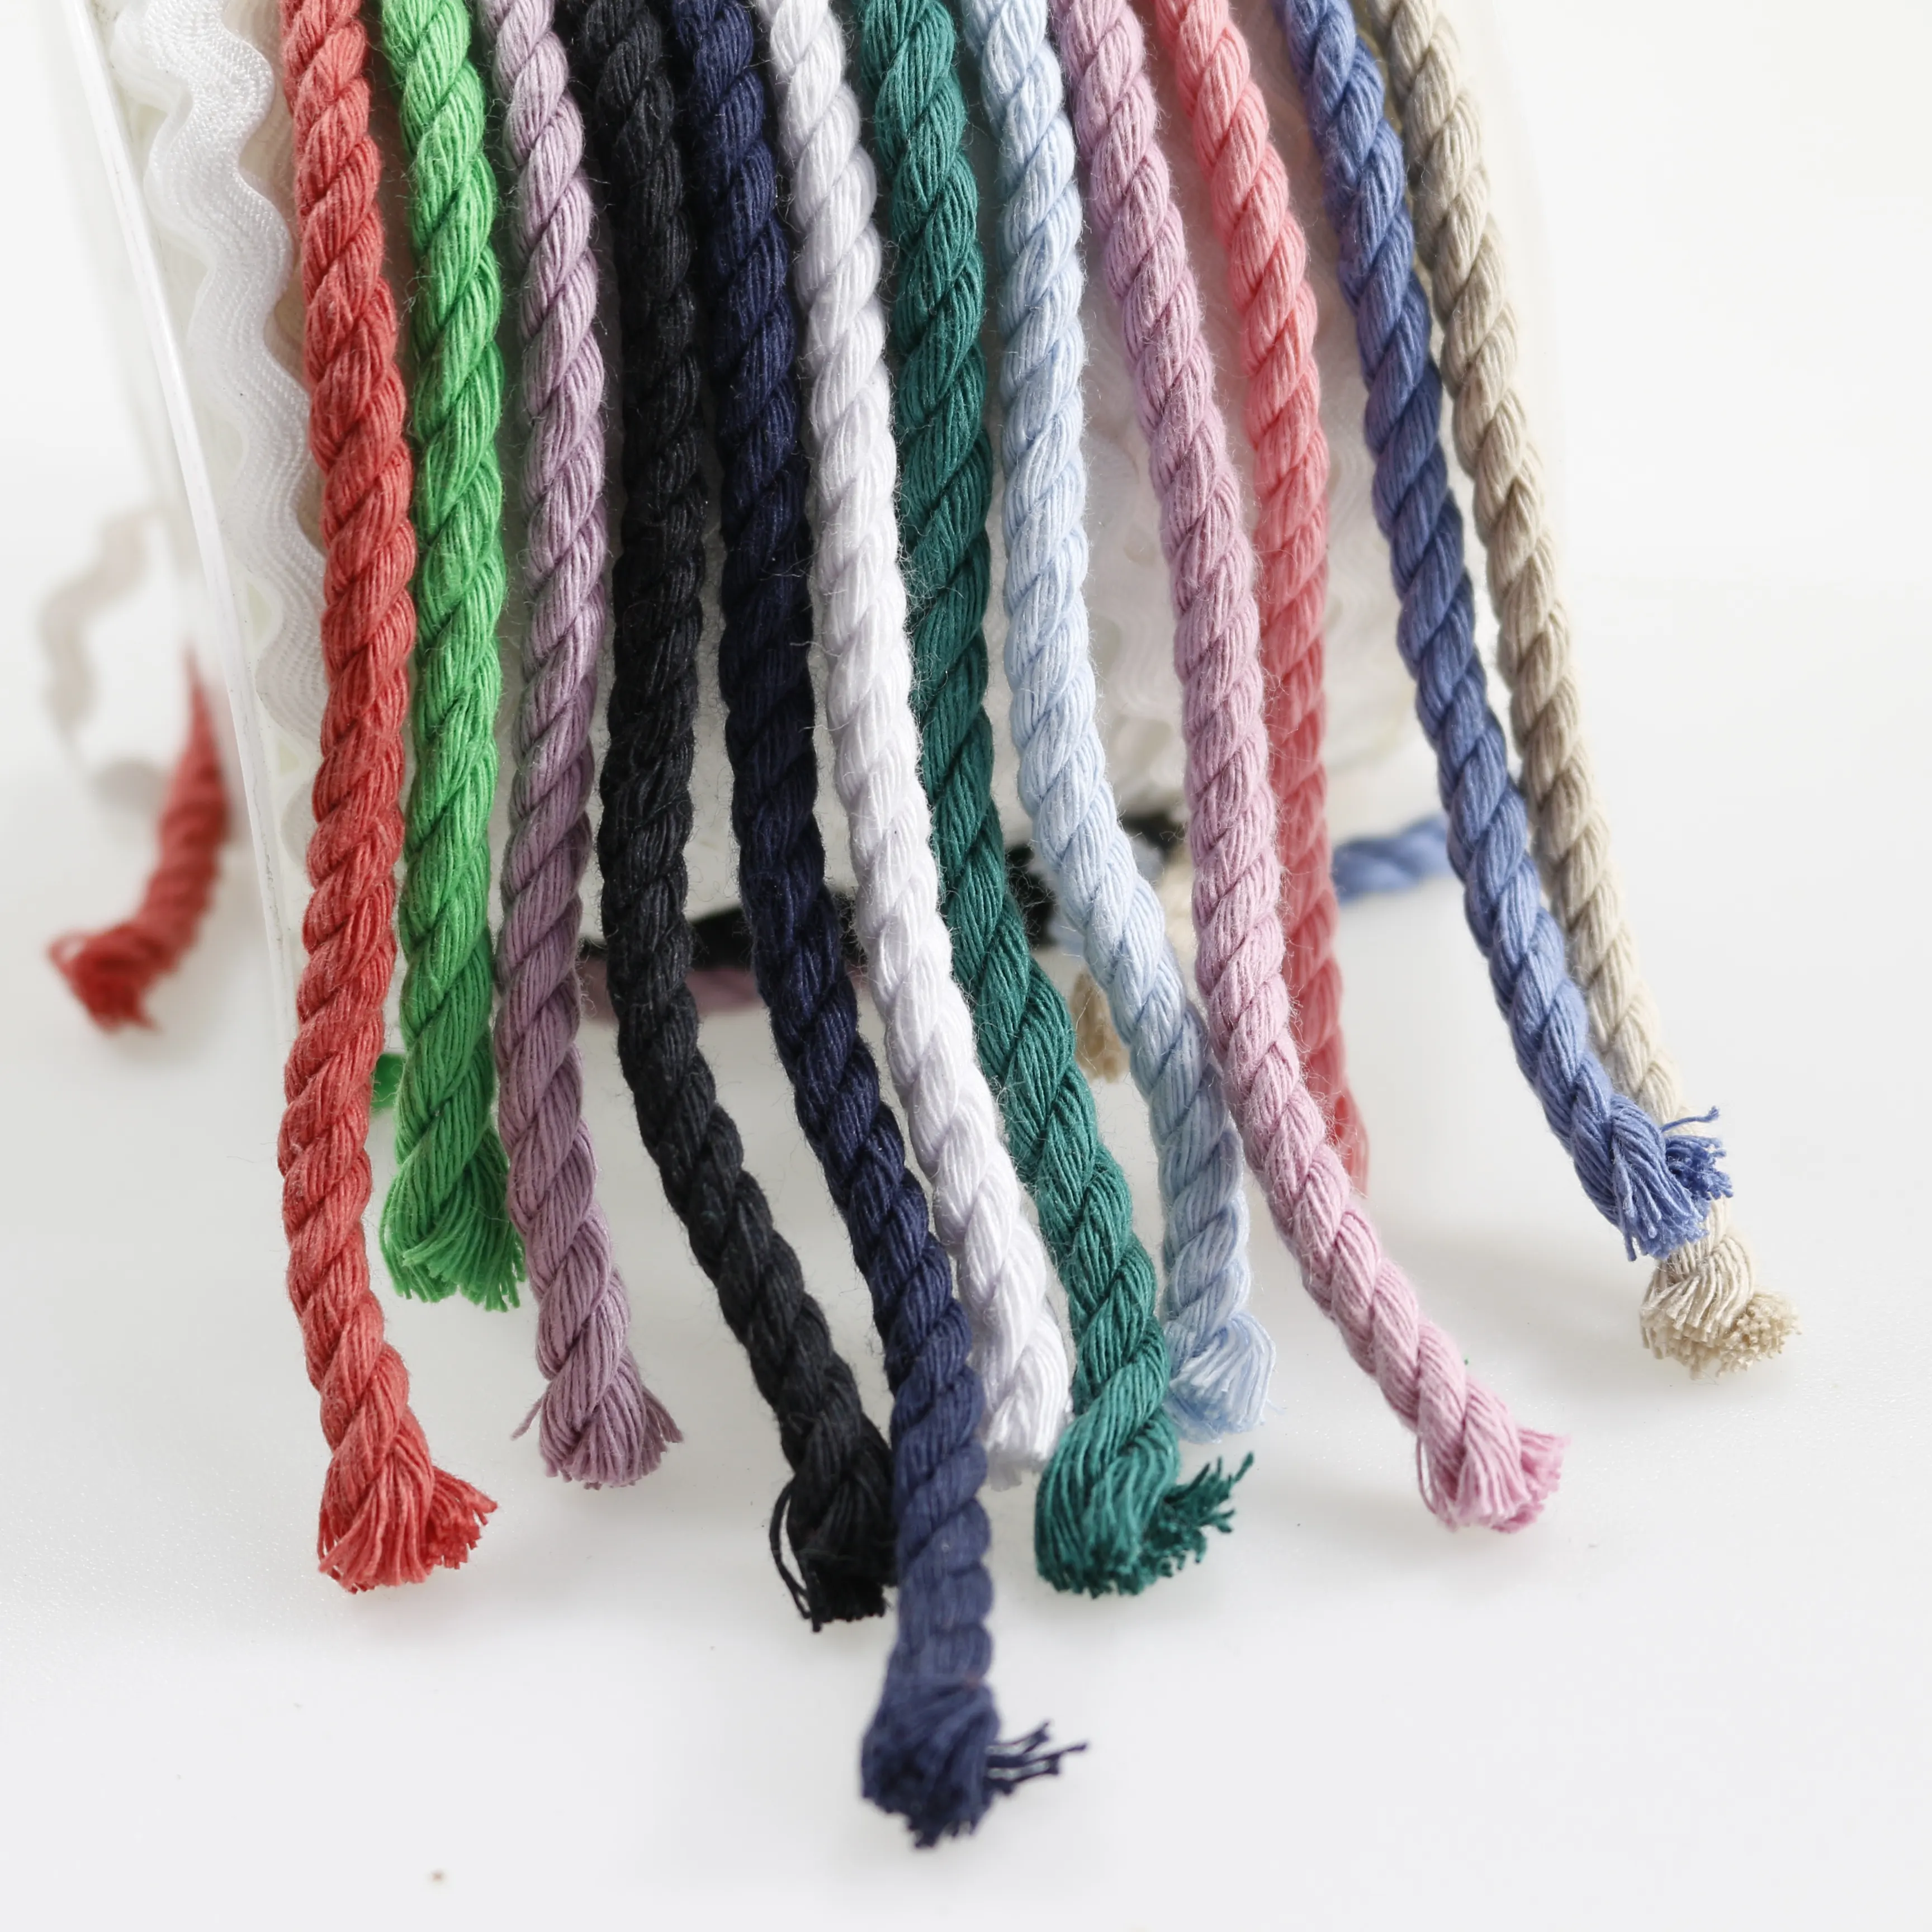 4mm 5mm Wholesale Multi Colors Twisted Rope Natural Organic 100%Cotton Round Twist Thread 3Strands Twisted Cord Macrame